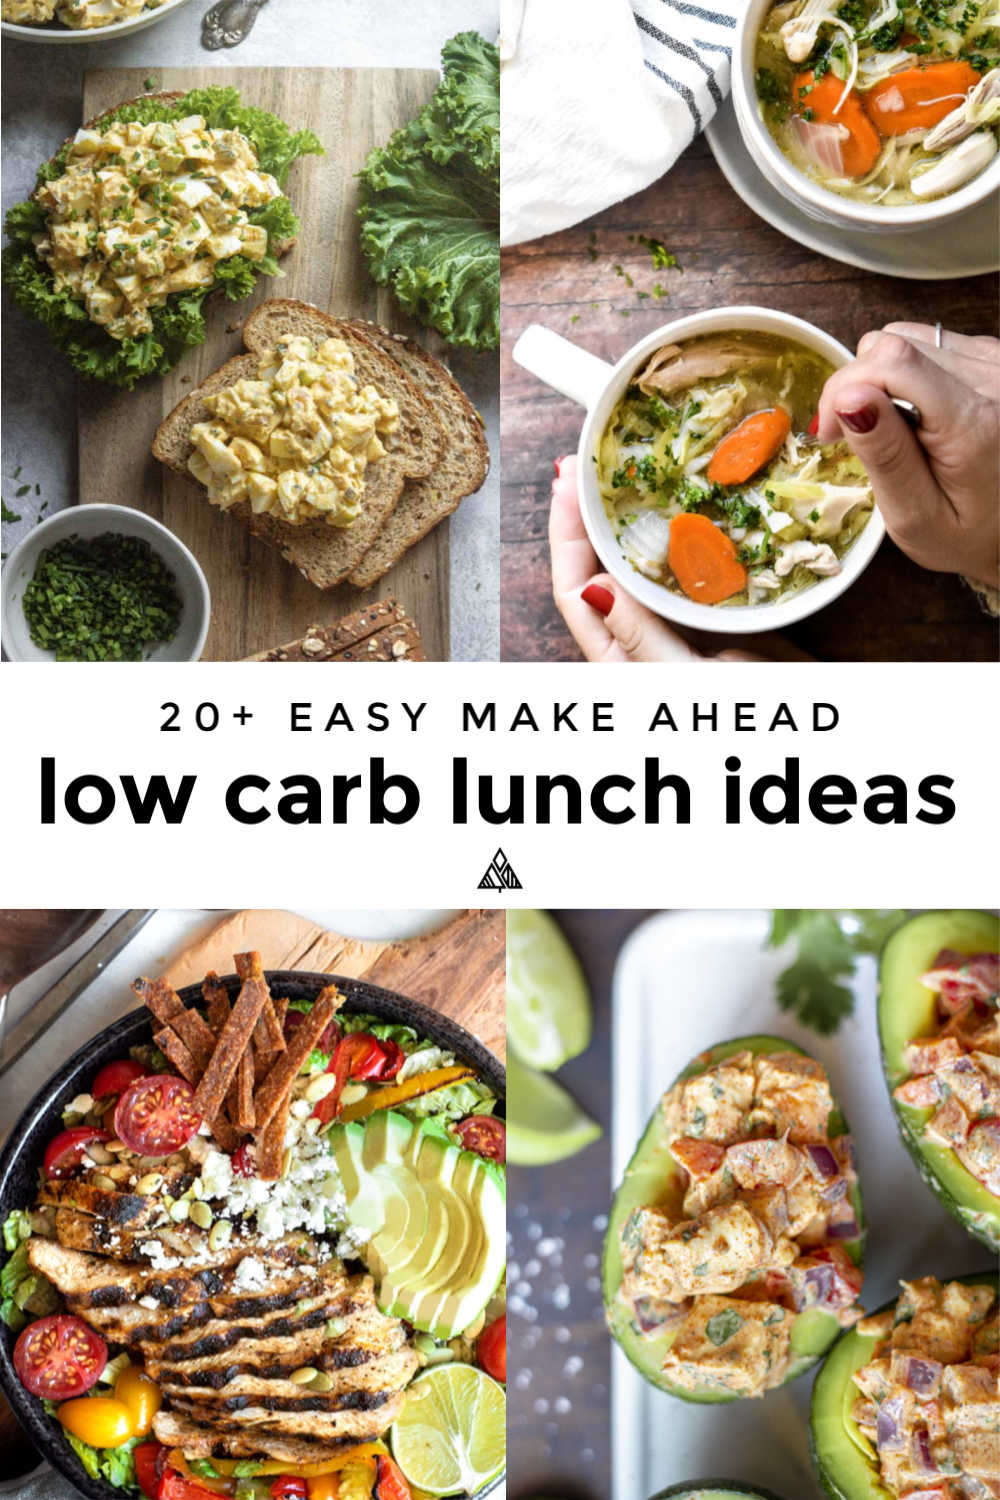 Low Carb Lunch Recipes Awesome 22 Low Carb Lunch Ideas Easy Make Ahead Little Pine